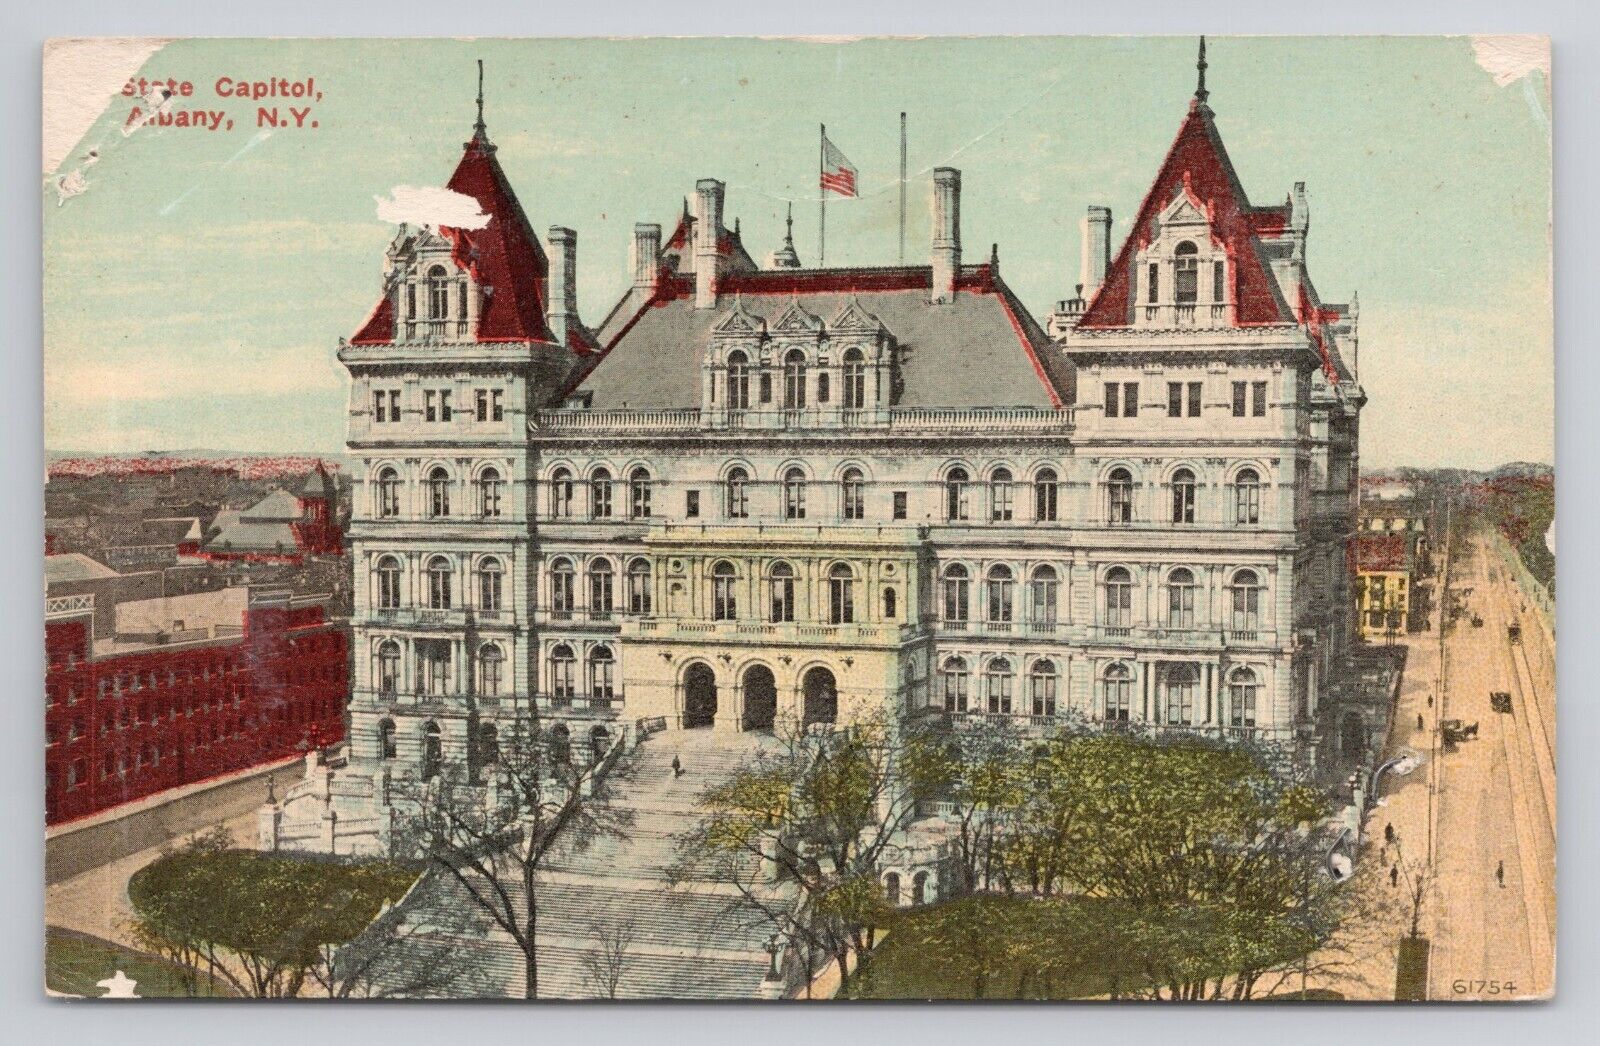 State Capitol Albany New York c1910 Antique Postcard